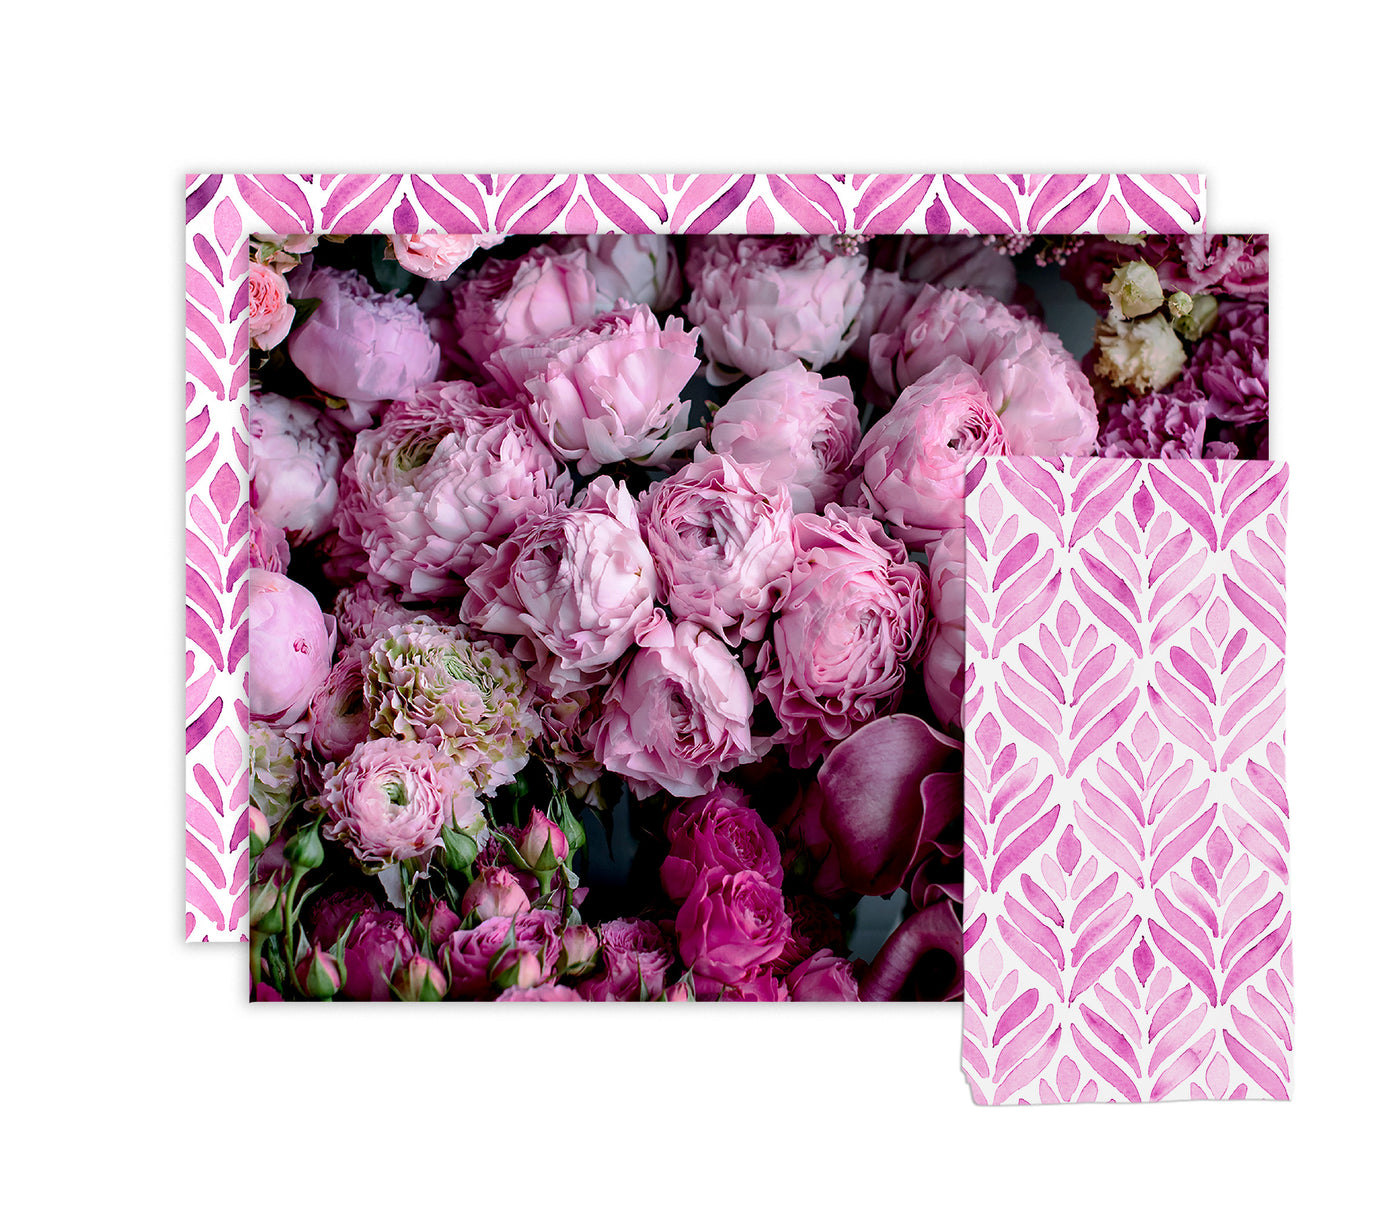 PLACEMAT SET OF 2 - PINK IN BLOOM